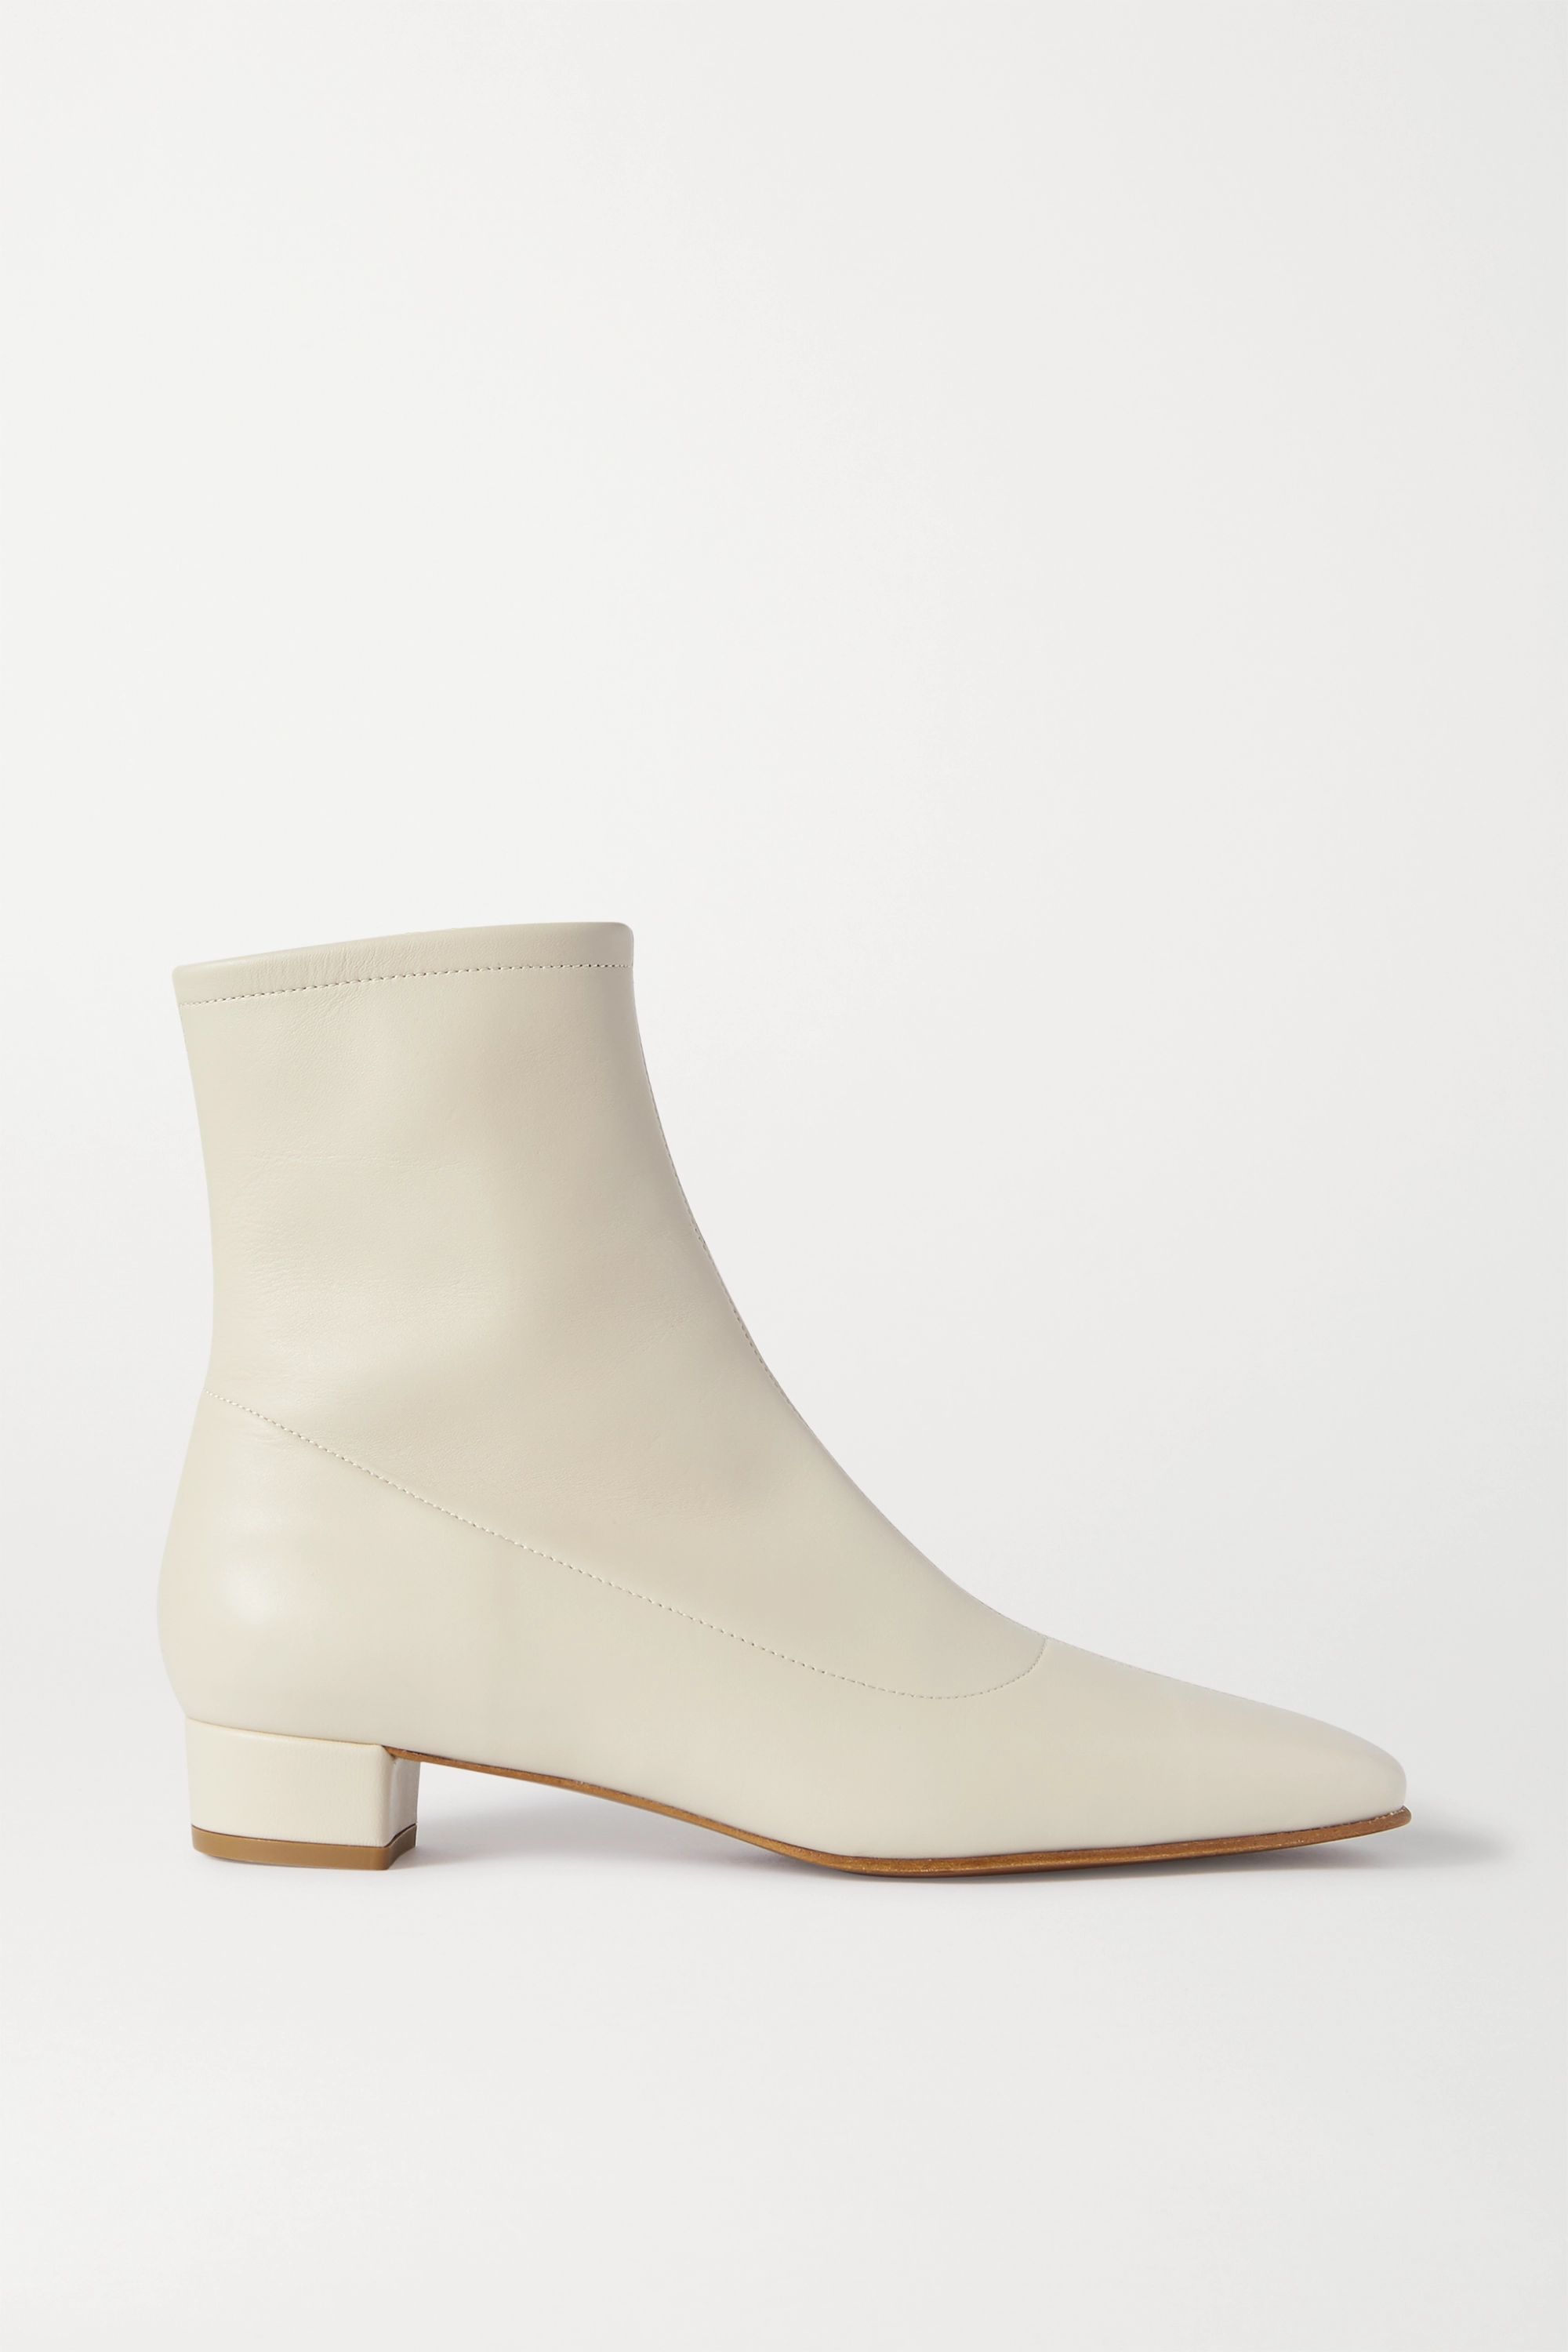 women's flat white ankle boots